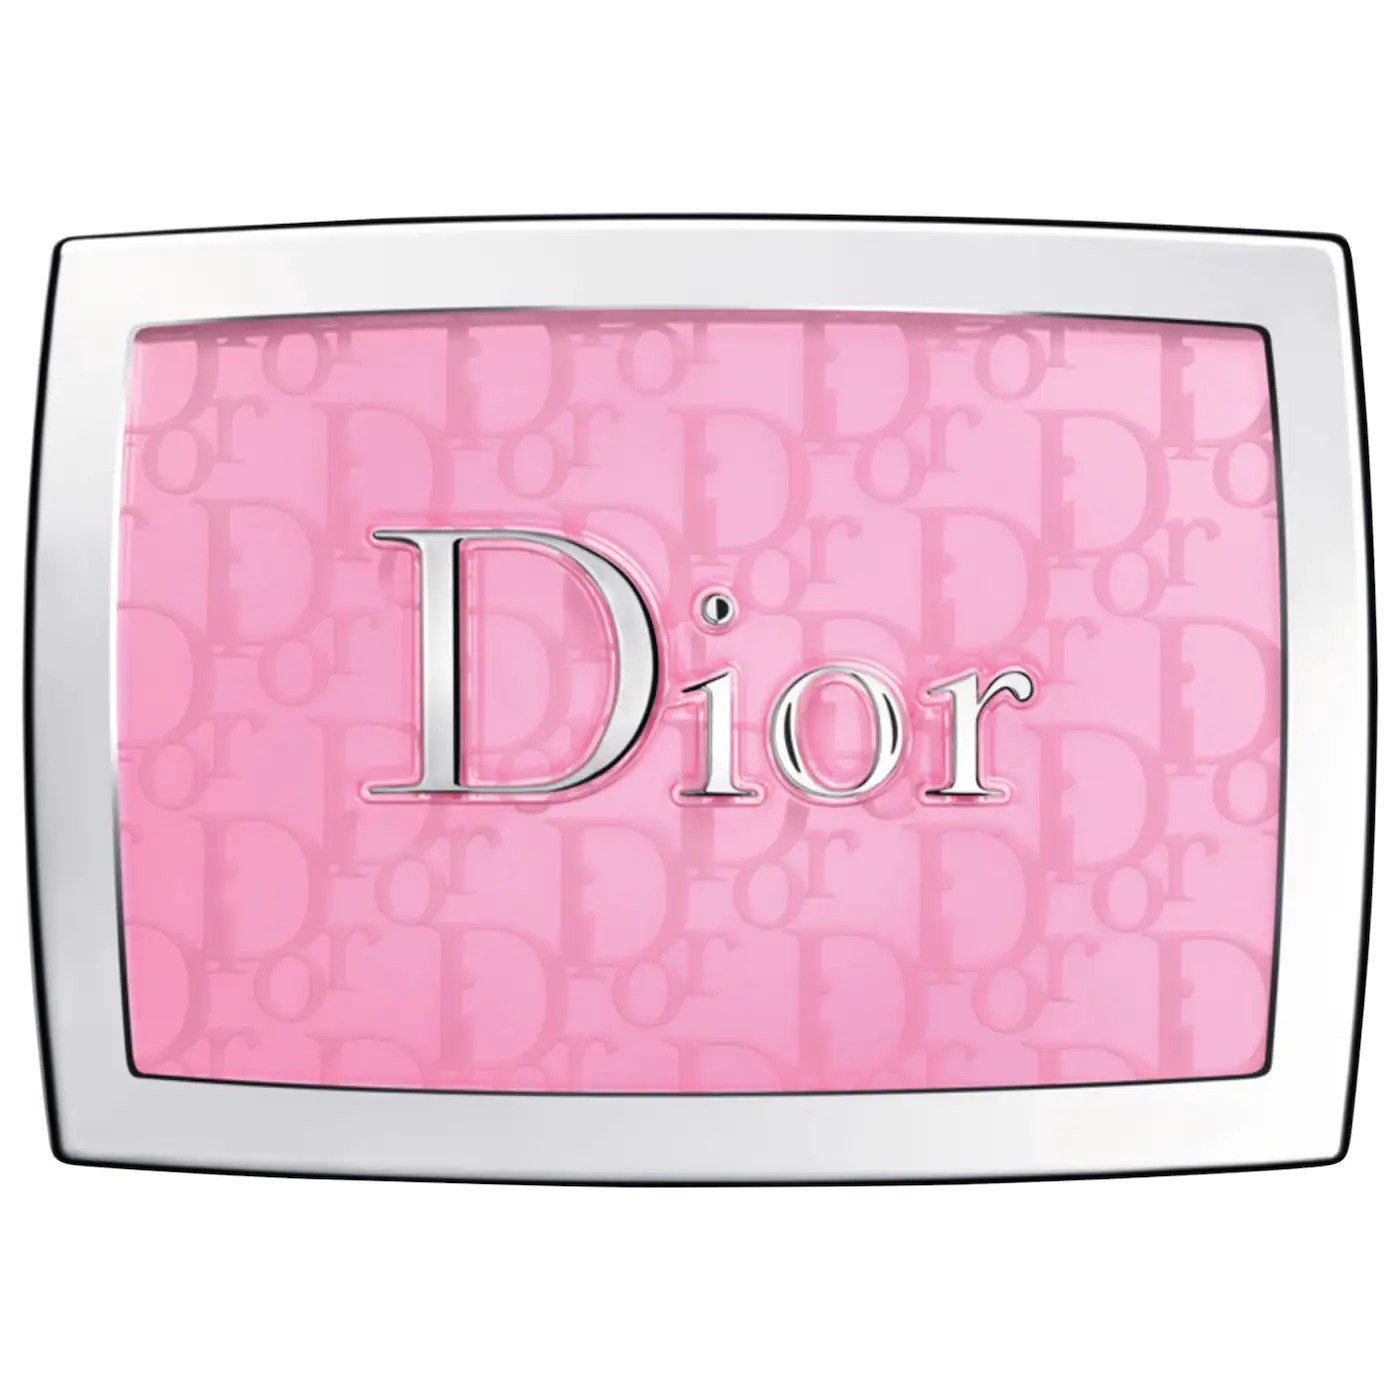 dior rosy glow blush compact on a white background for the i'm cold makeup look